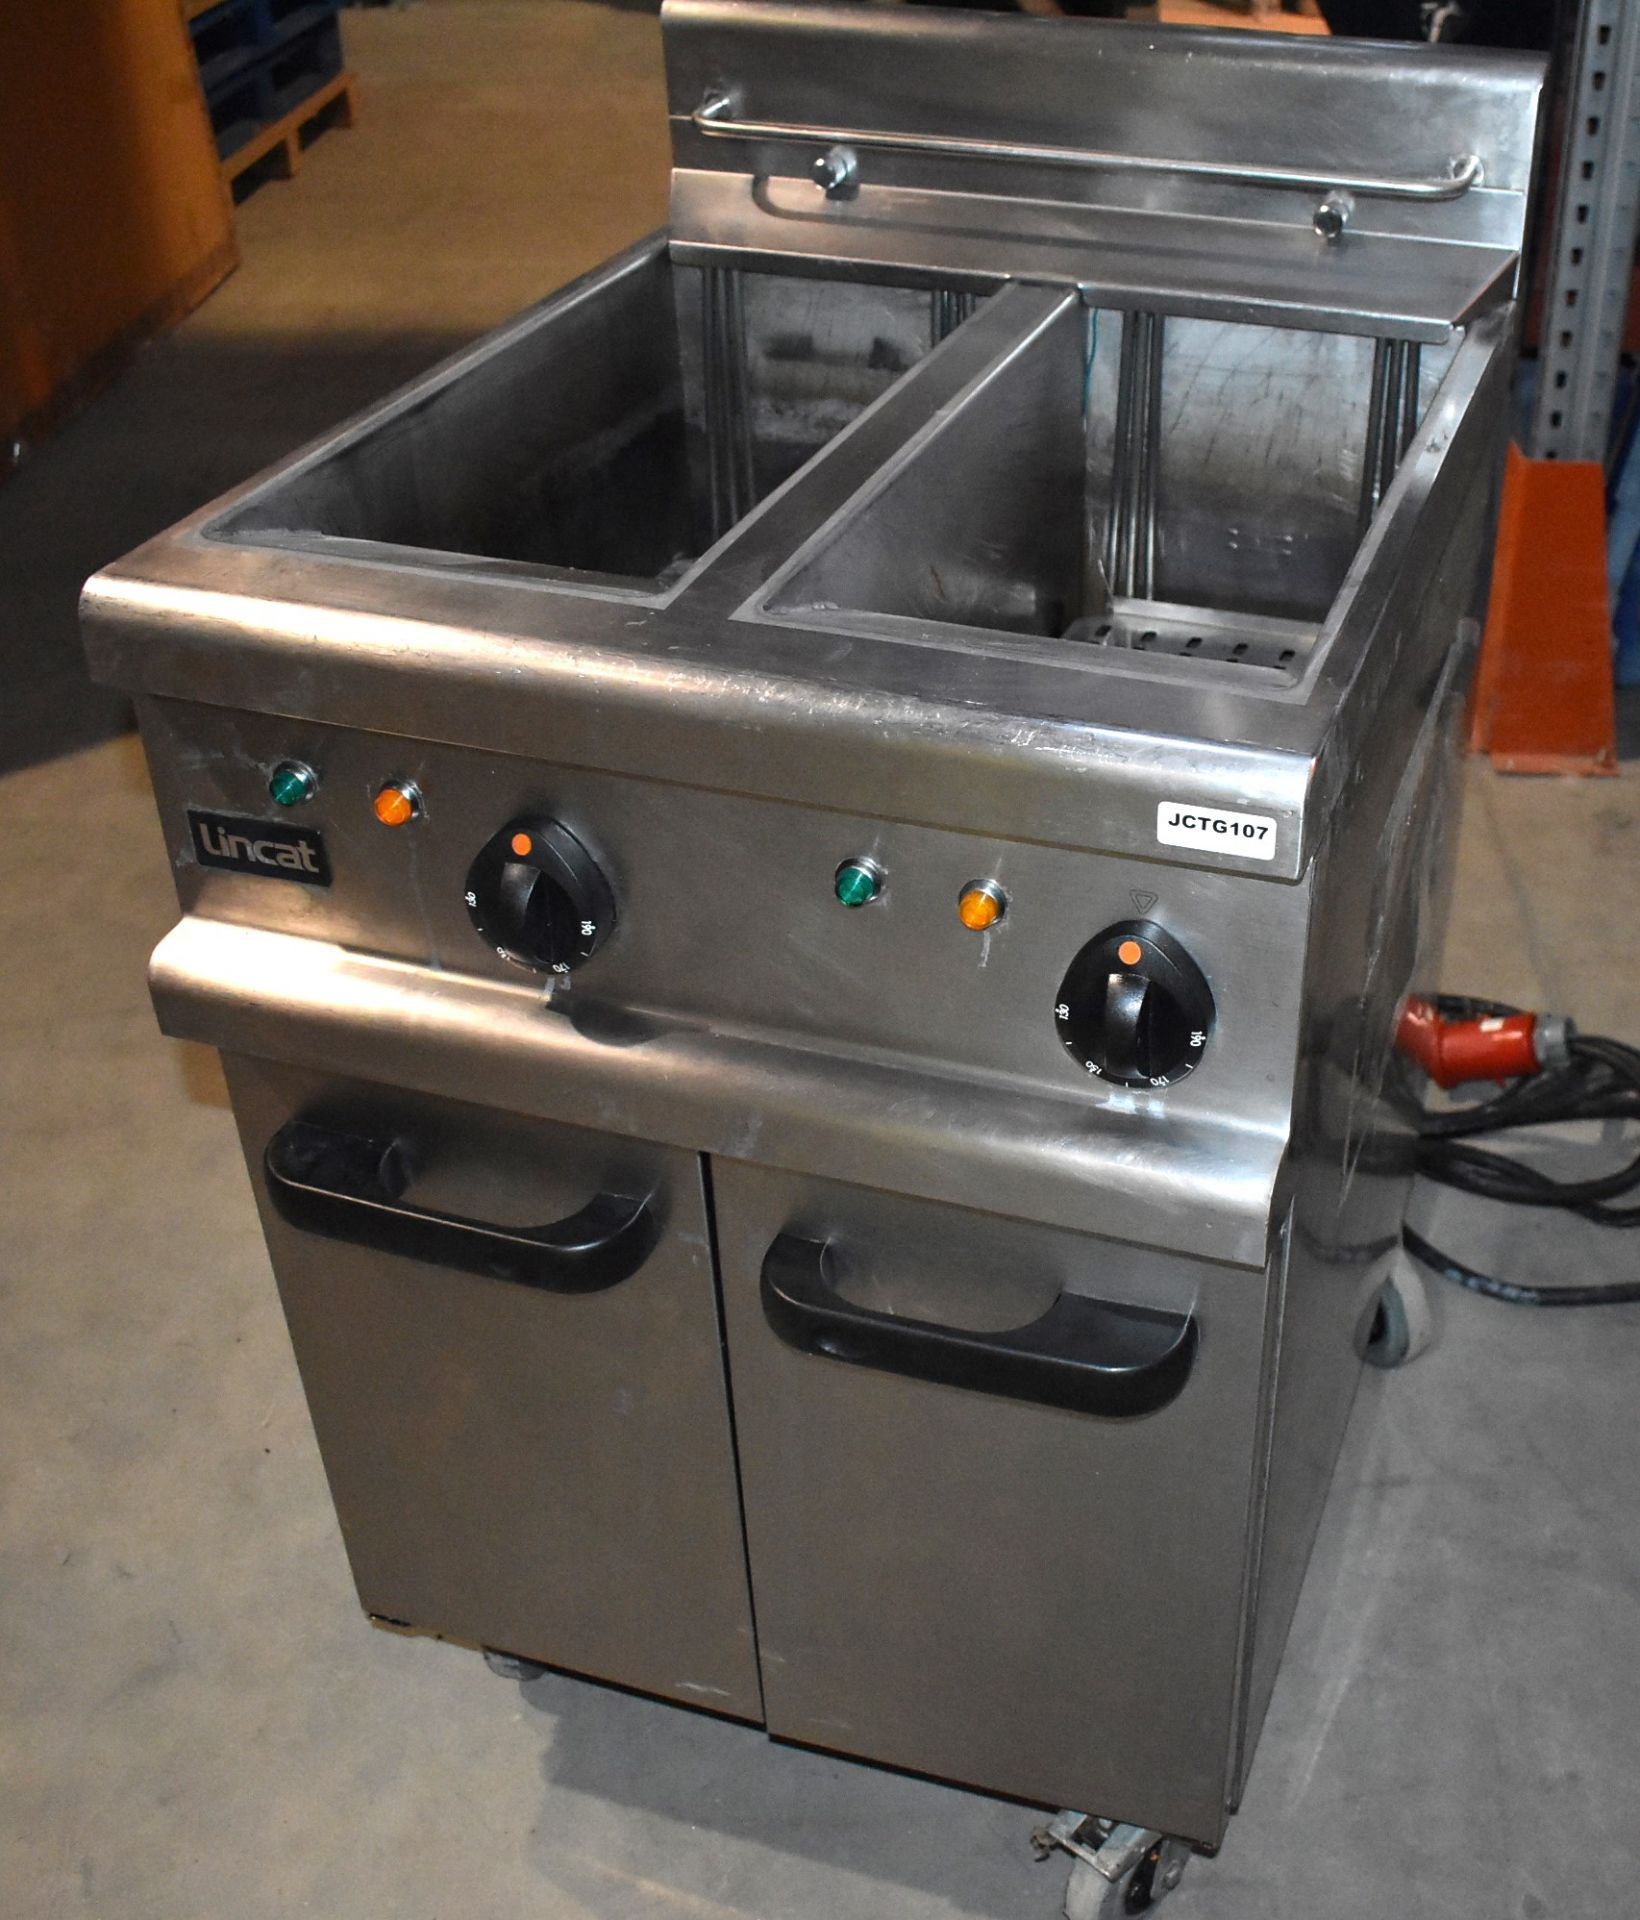 1 x Lincat Opus 700 Twin Tank Commercial Fryer - 3 Phase - Original RRP £3,700 - Recently Removed - Image 2 of 8